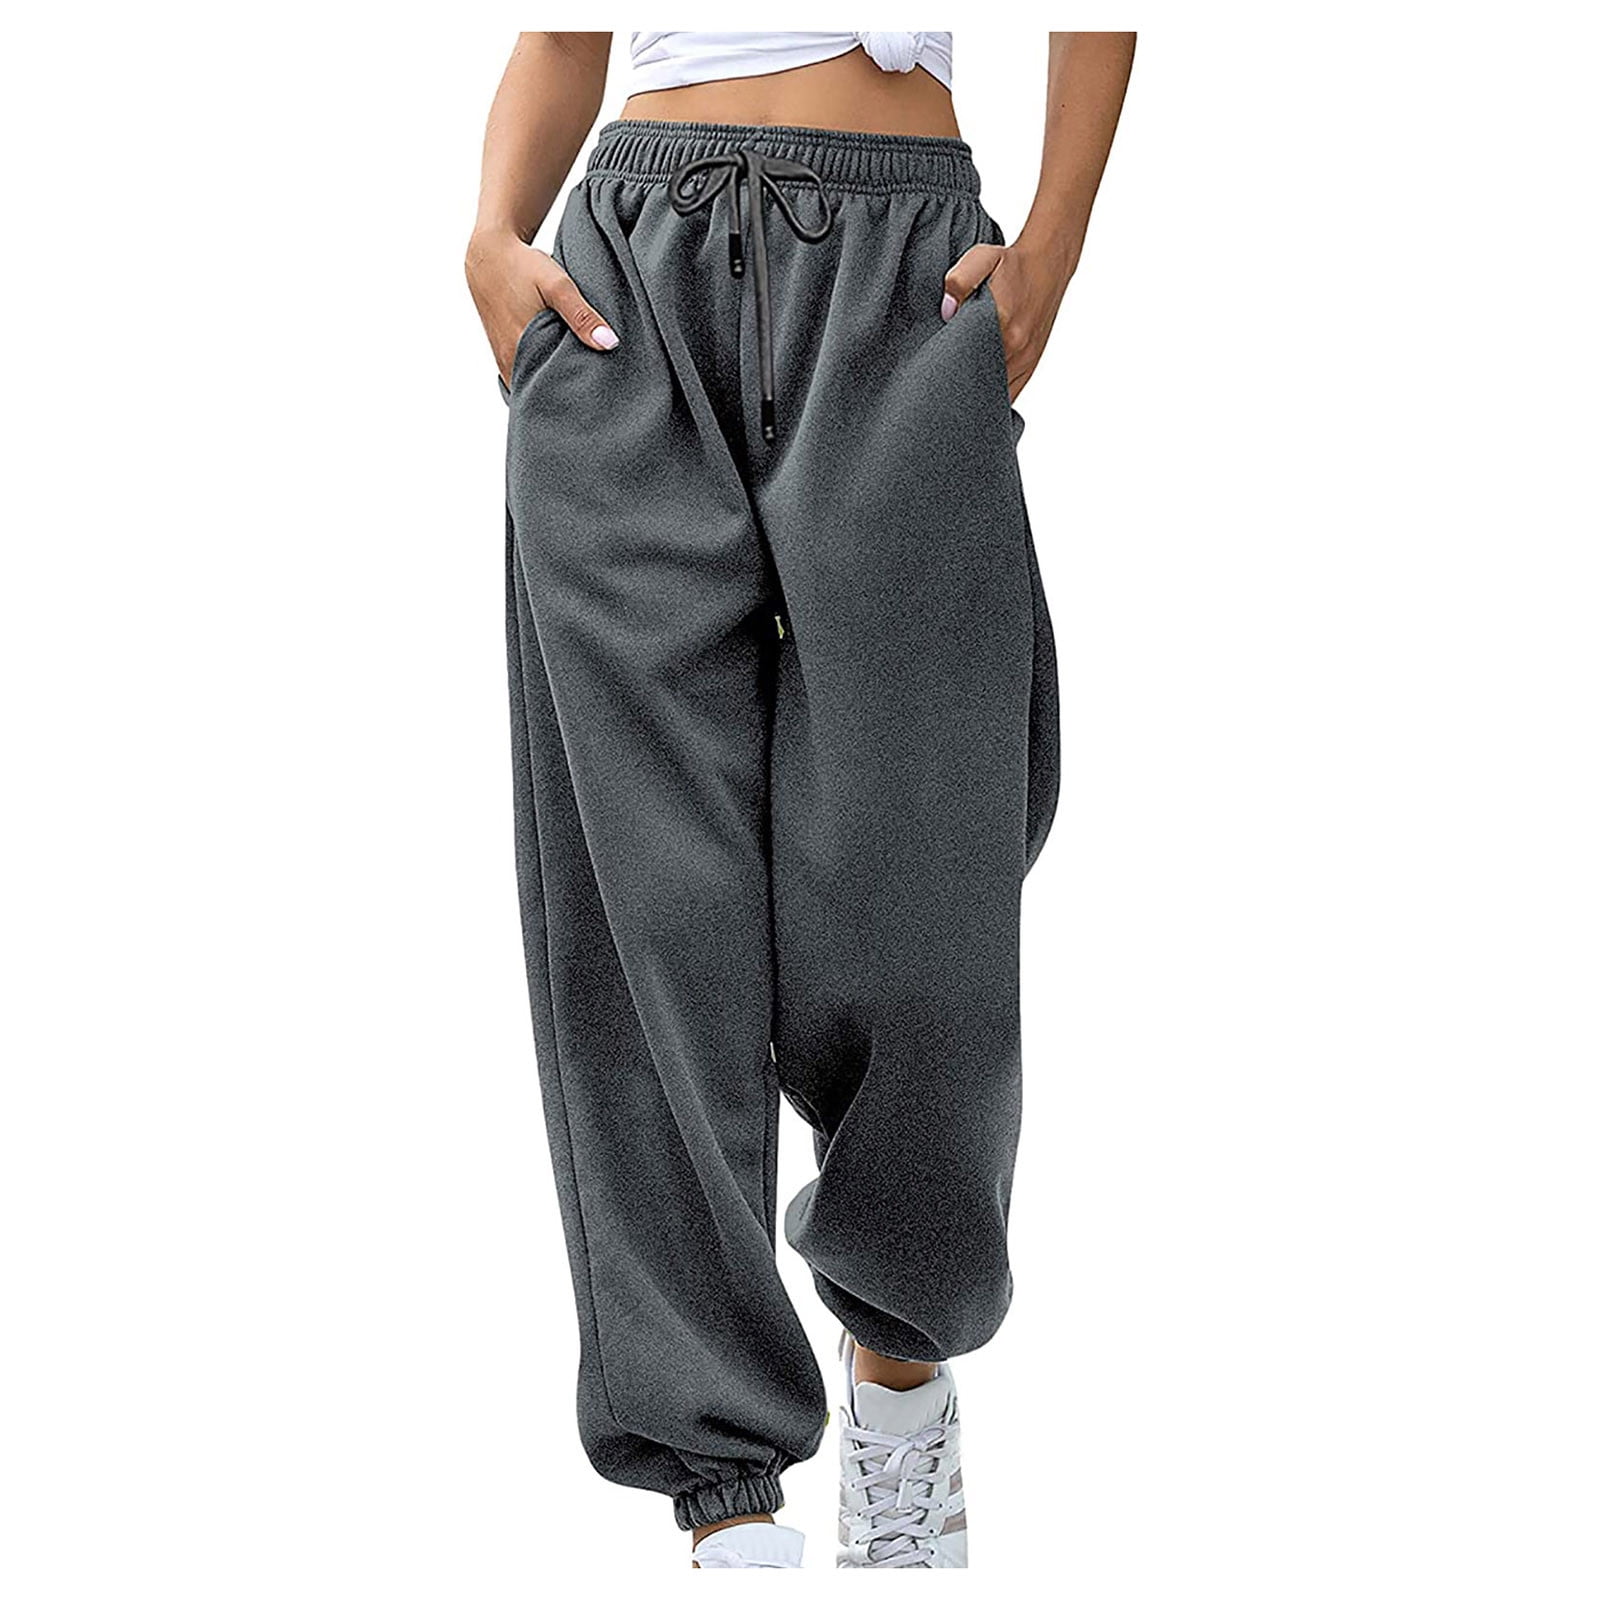 Womens High Waisted Baggy Sweatpants Comfy Drawstring Elastic Waist Jogger  Pants Athletic Lounge Trousers with Pockets 